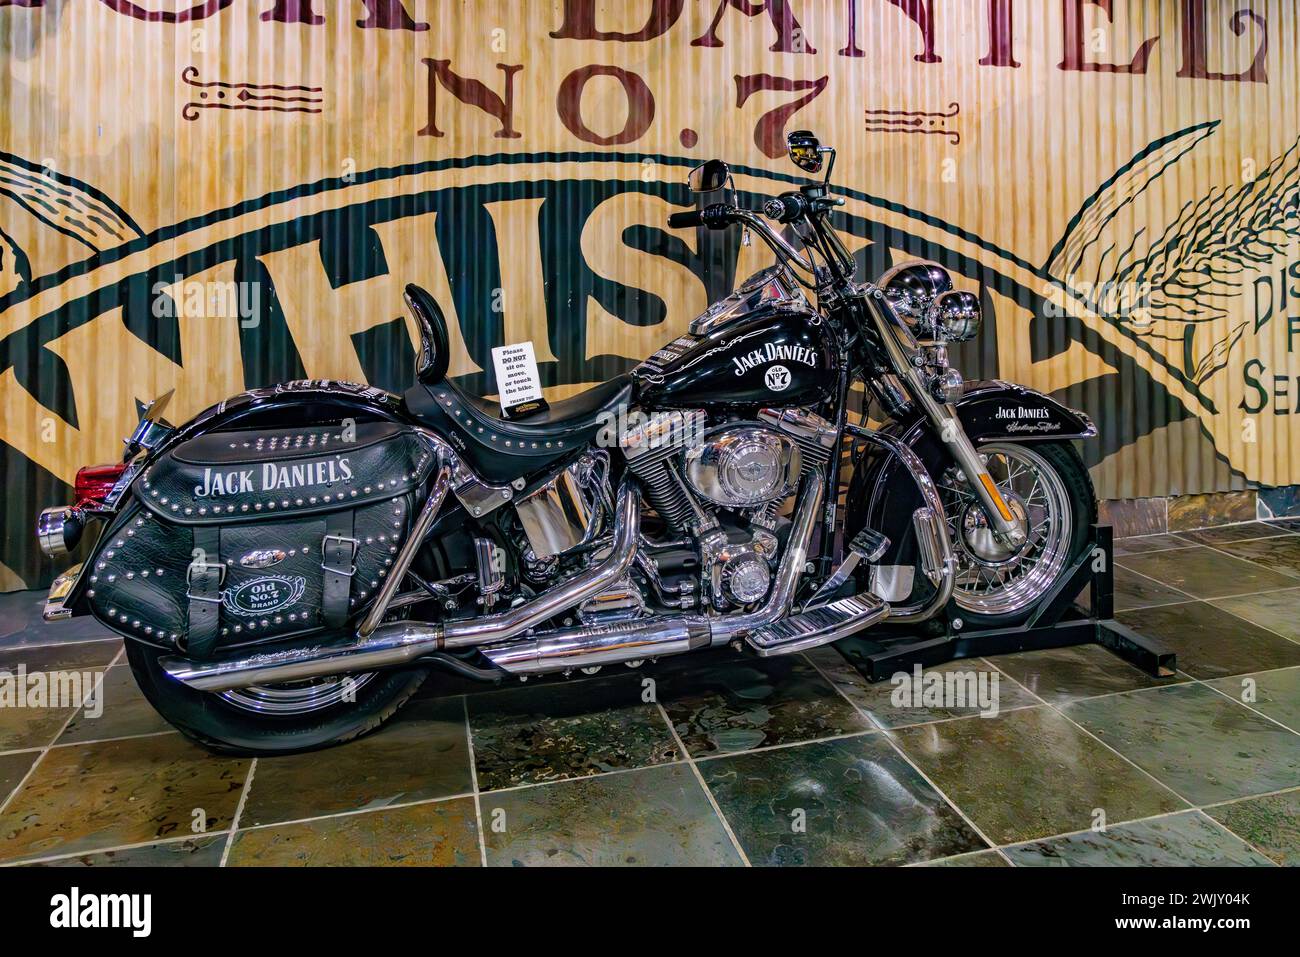 Jack Daniel's themed Harley Davidson motorcycle on display in the ...